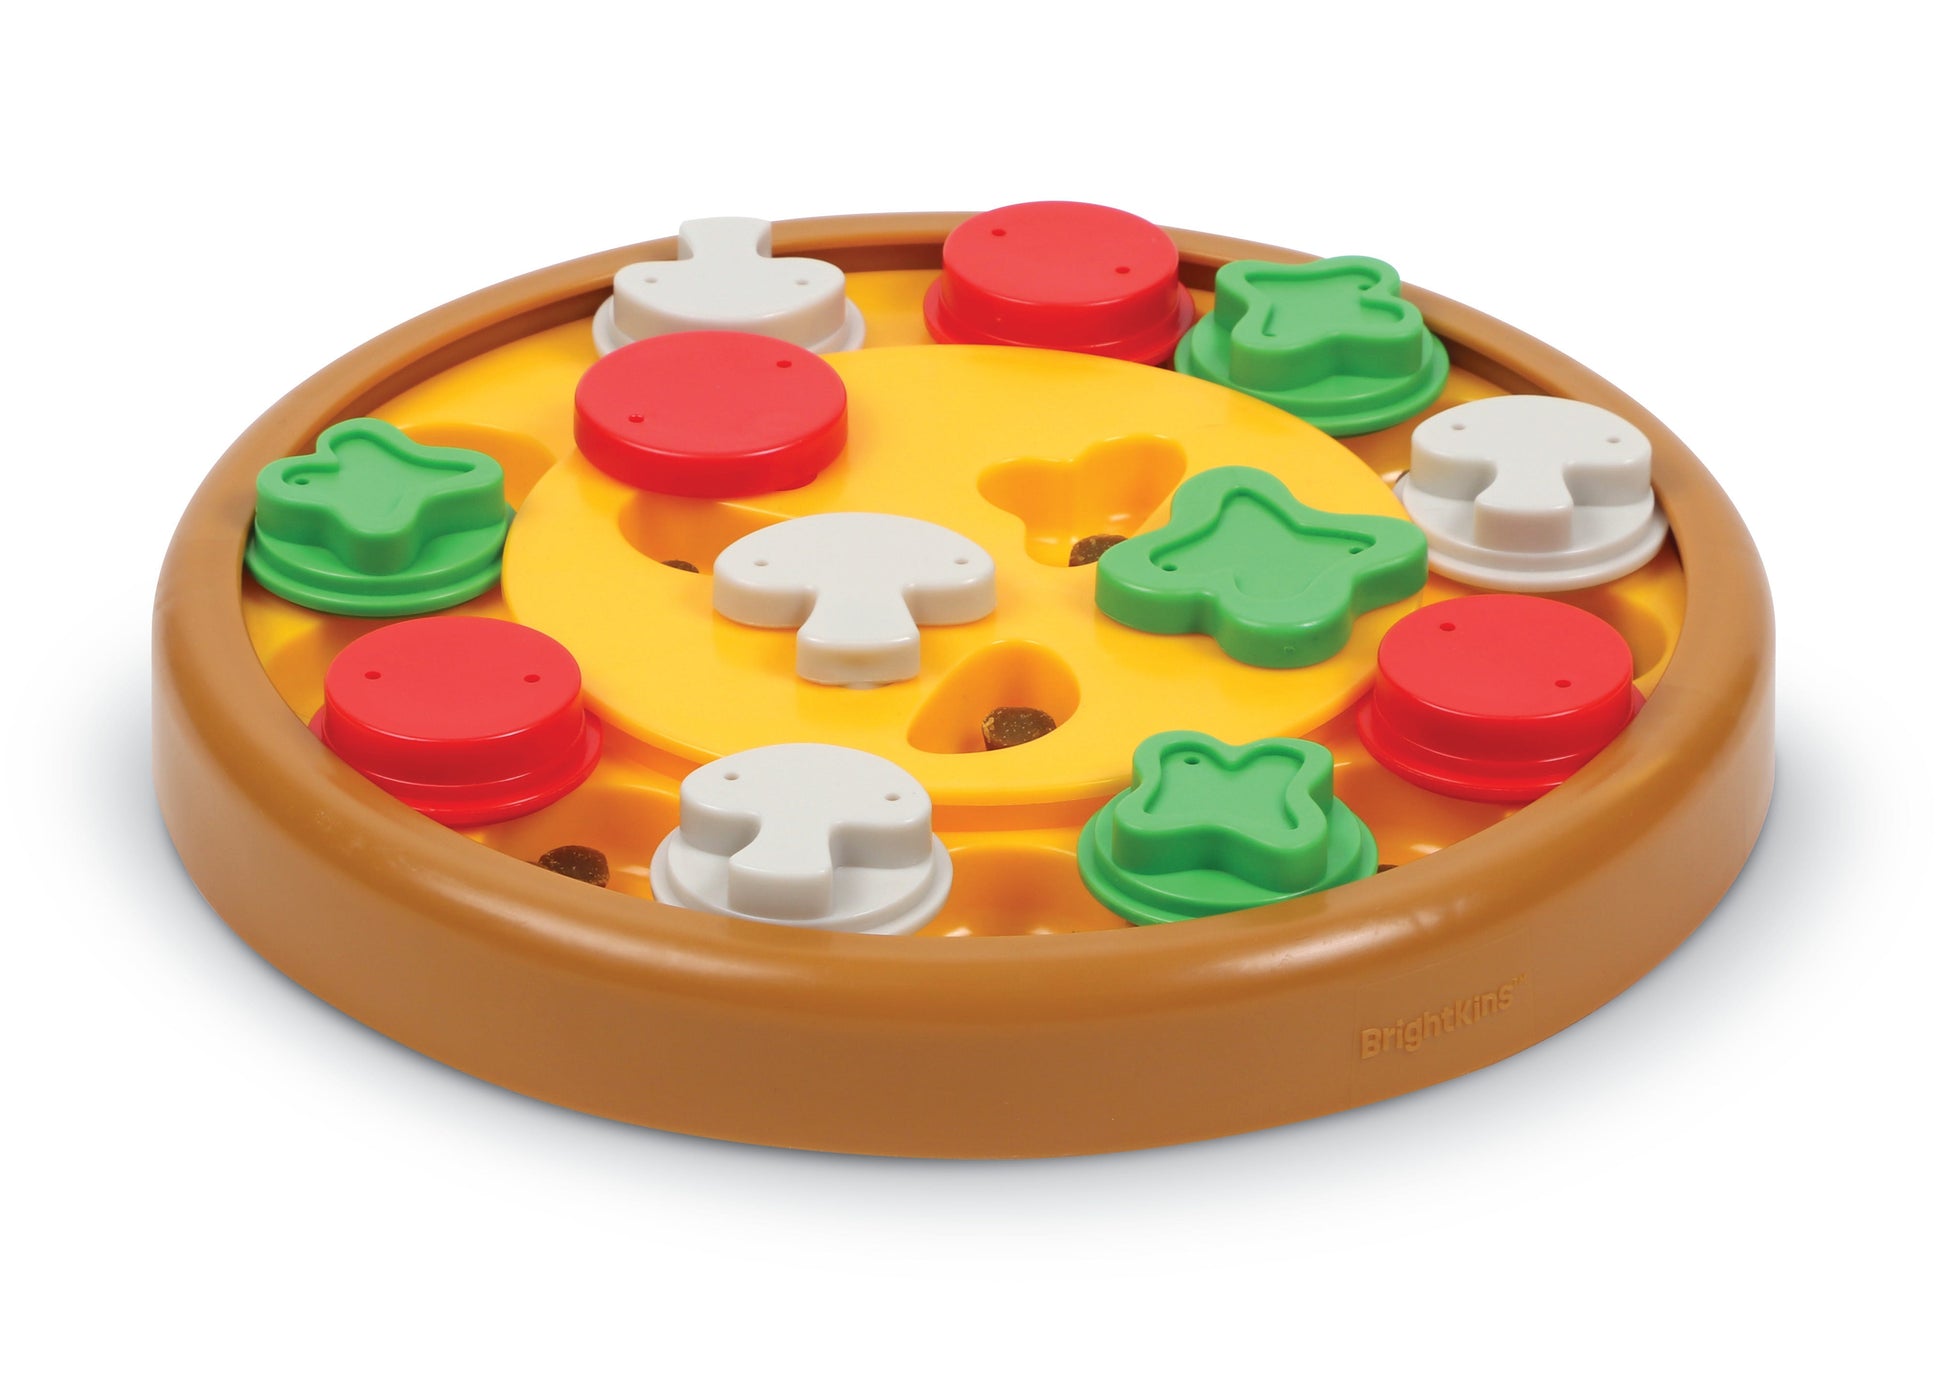 Brightkins Pizza Party Treat Interactive Dog Puzzles : Target